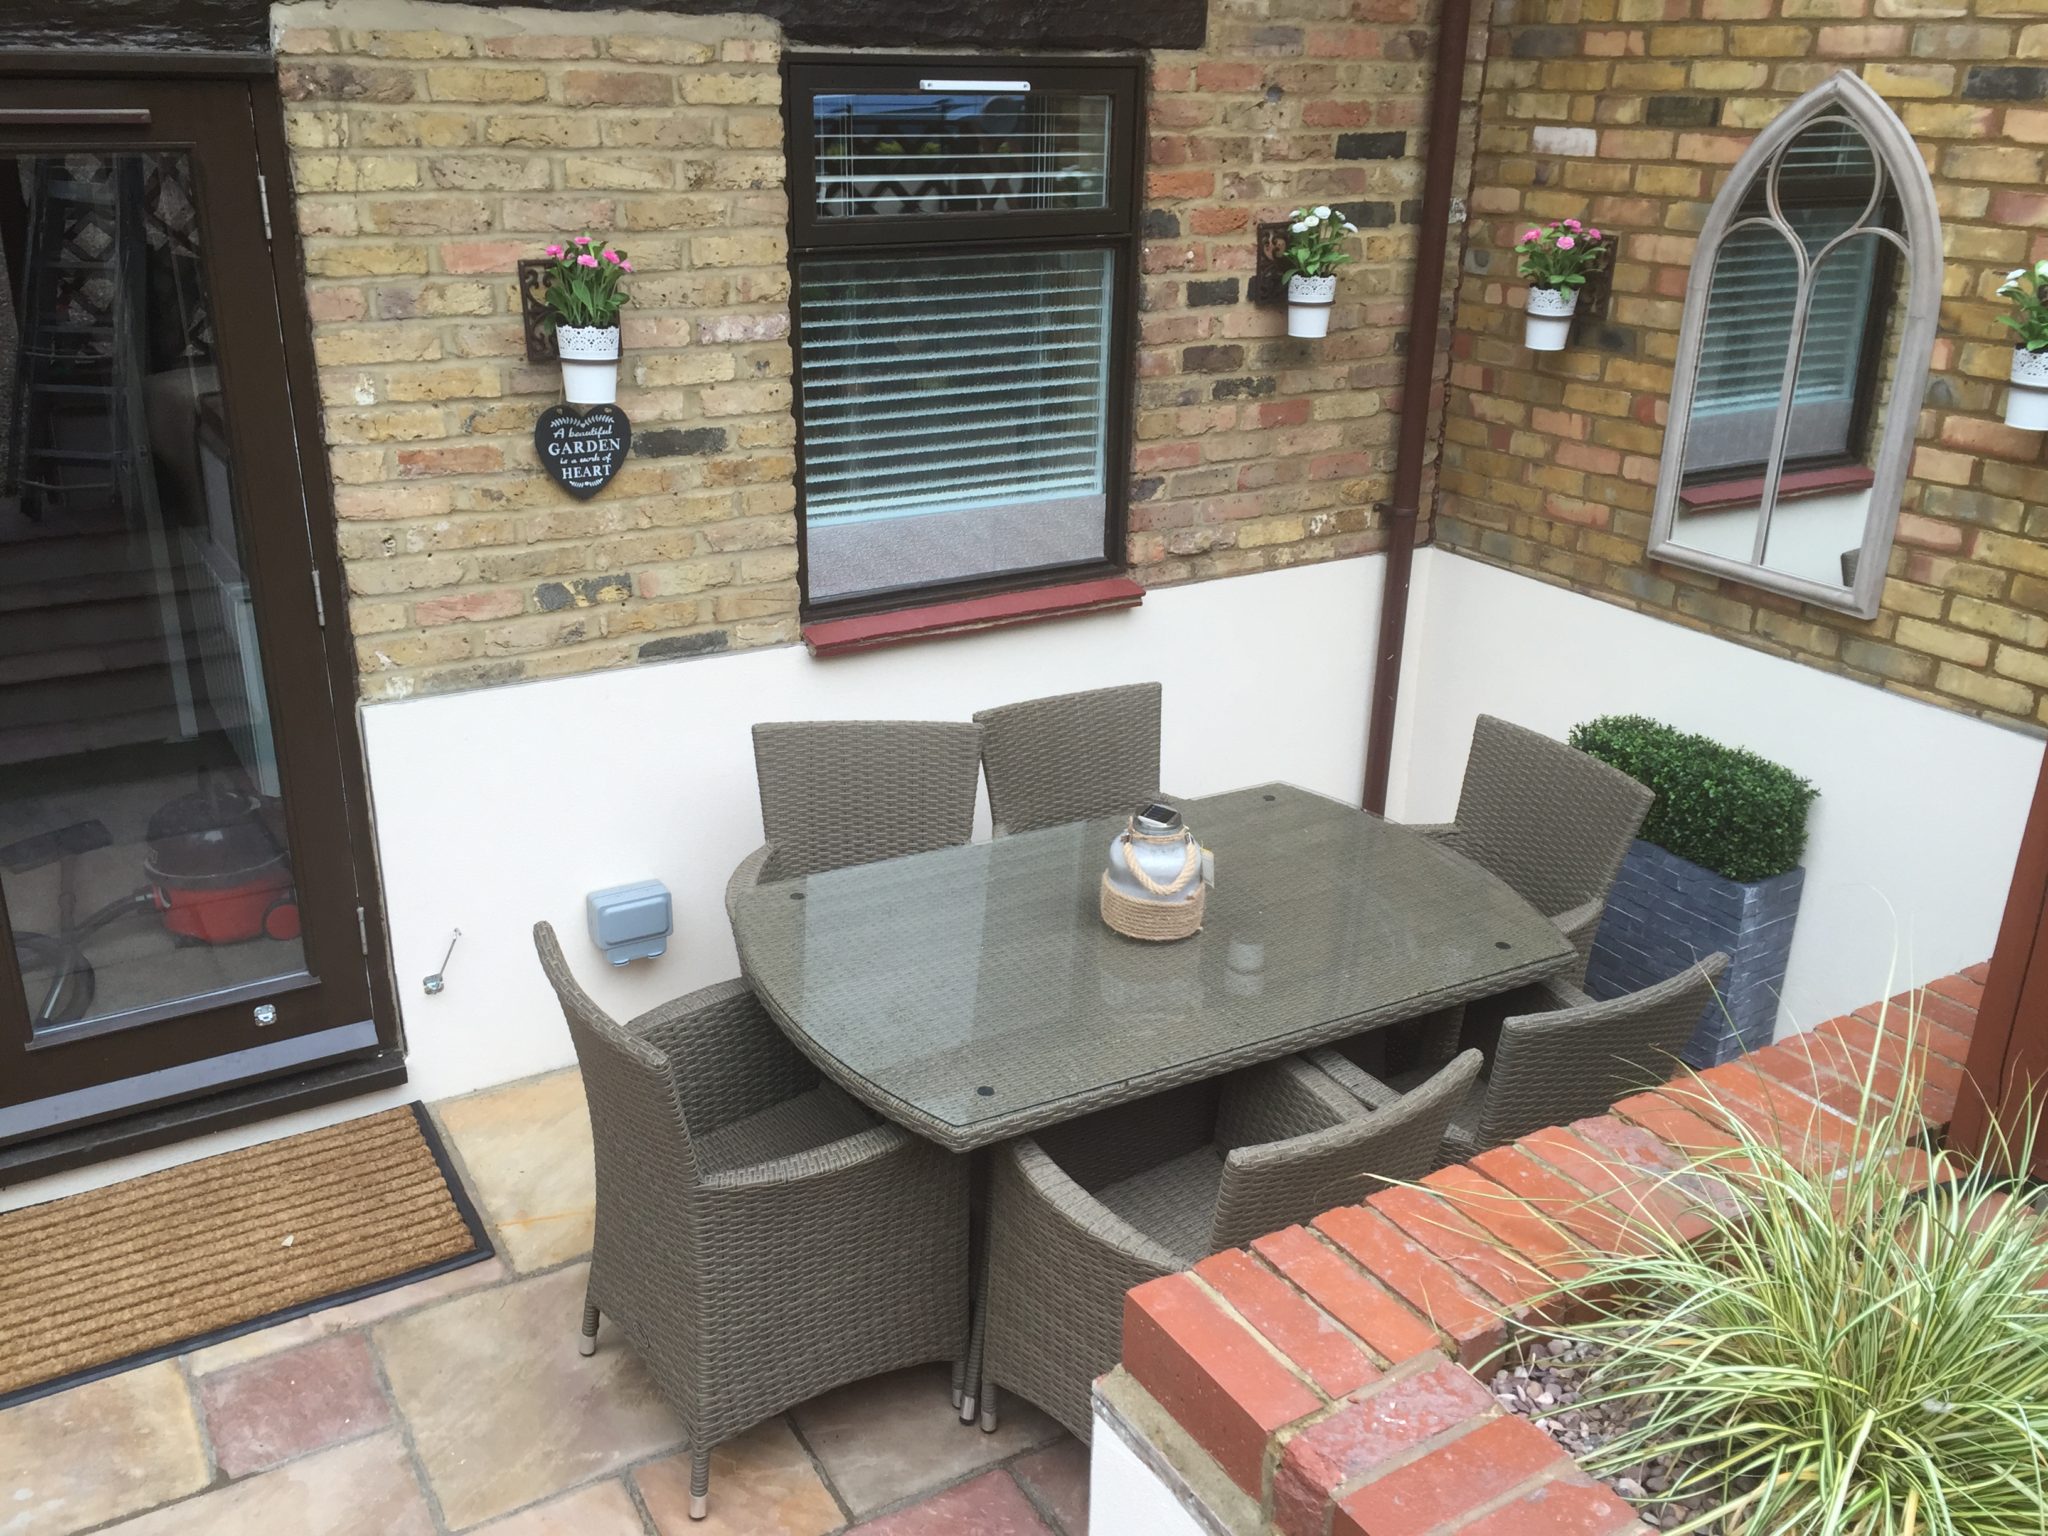 Serviced-Accommodation-Hertfordshire-available-now!-Book-cheap-Short-Let-Apartments-in-the-heart-of-Harpenden-with-24/7-check-in,-Courtyard-Garden-&-Fully-equipped-Kitchen-now!